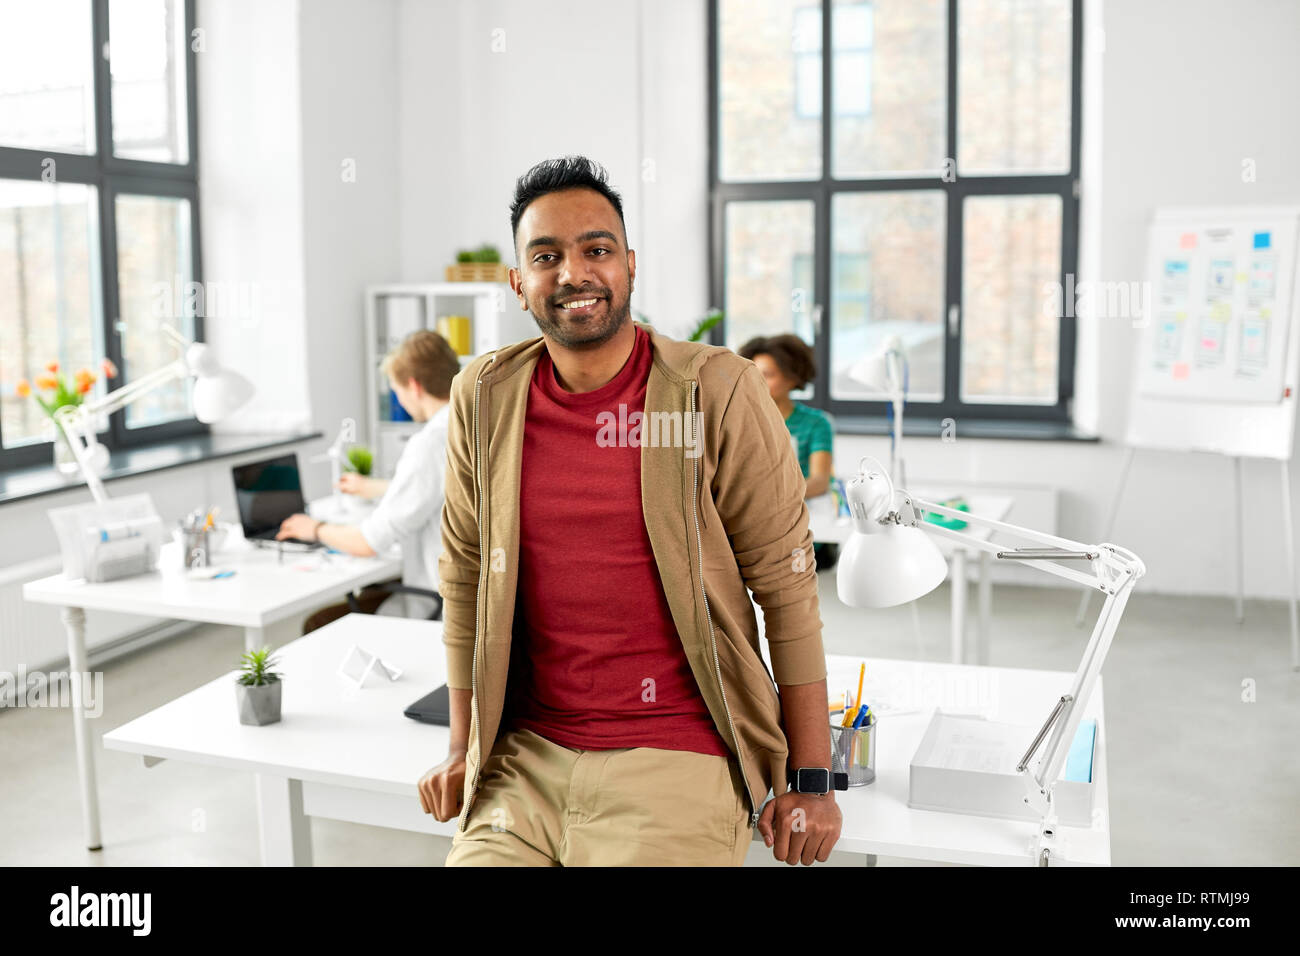 smiling indian man with smart watch at office Stock Photo